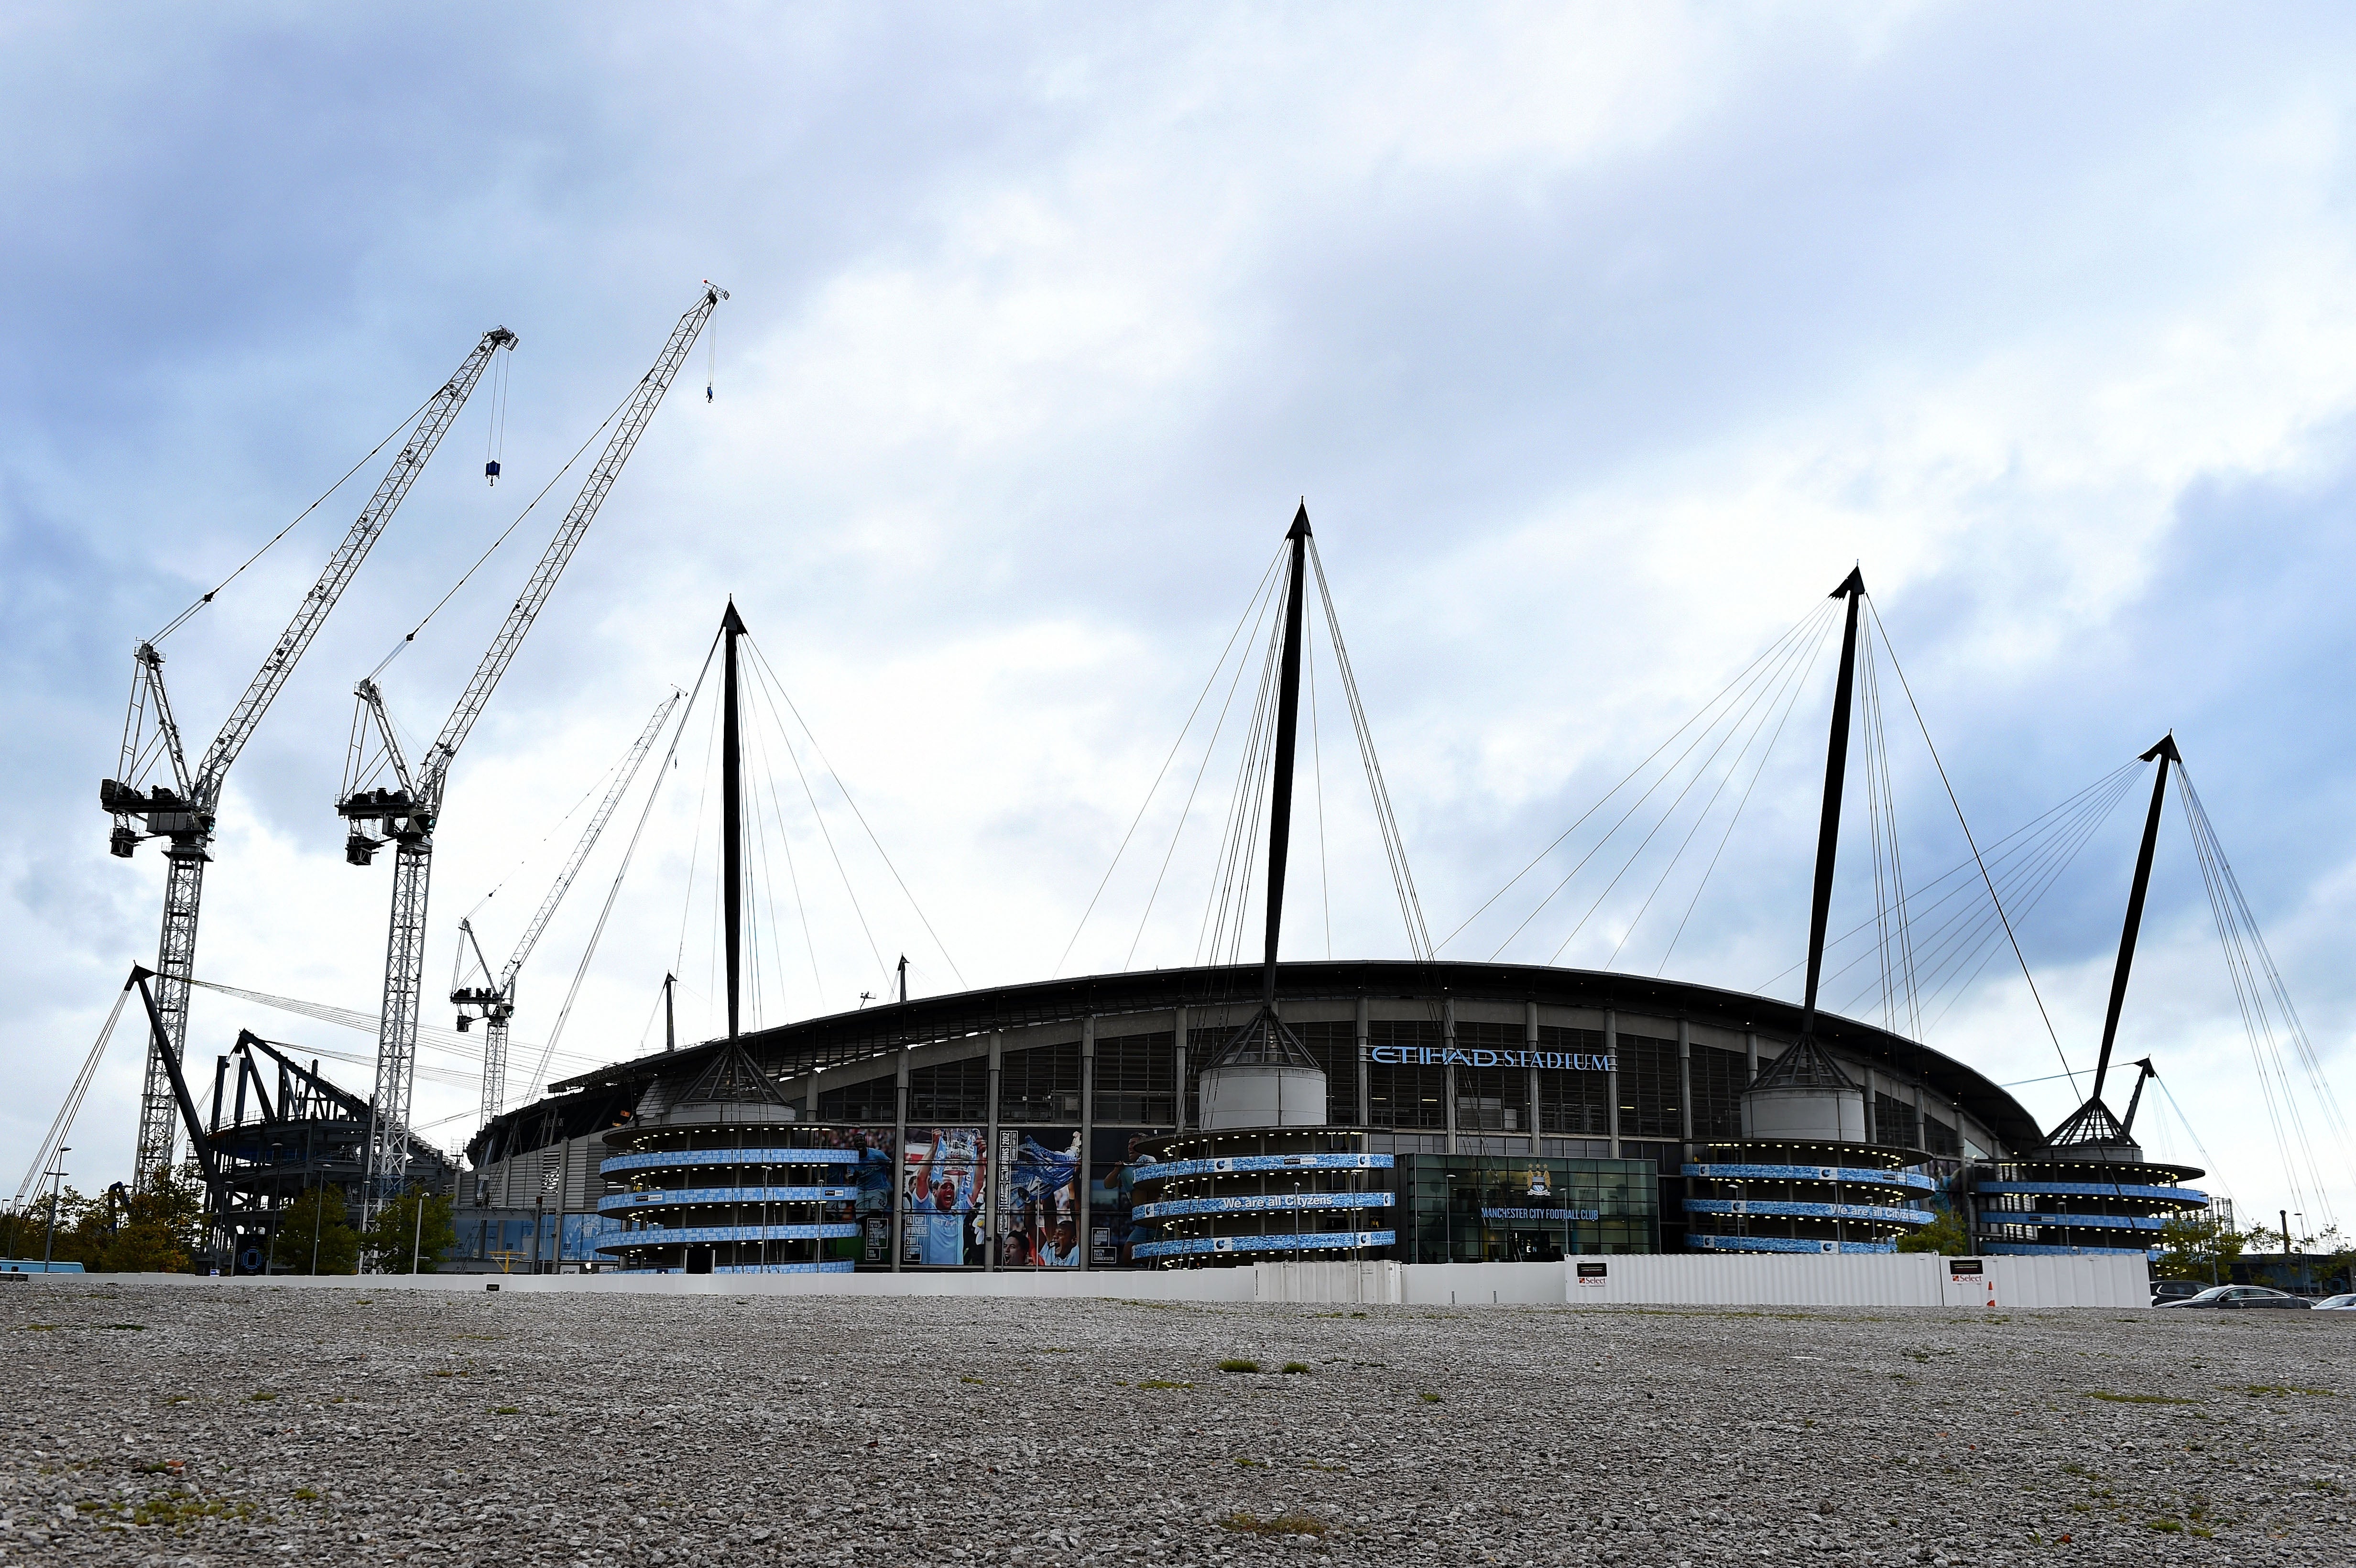 Manchester City’s owners have bought public land in the city stretching far beyond their Etihad stadium